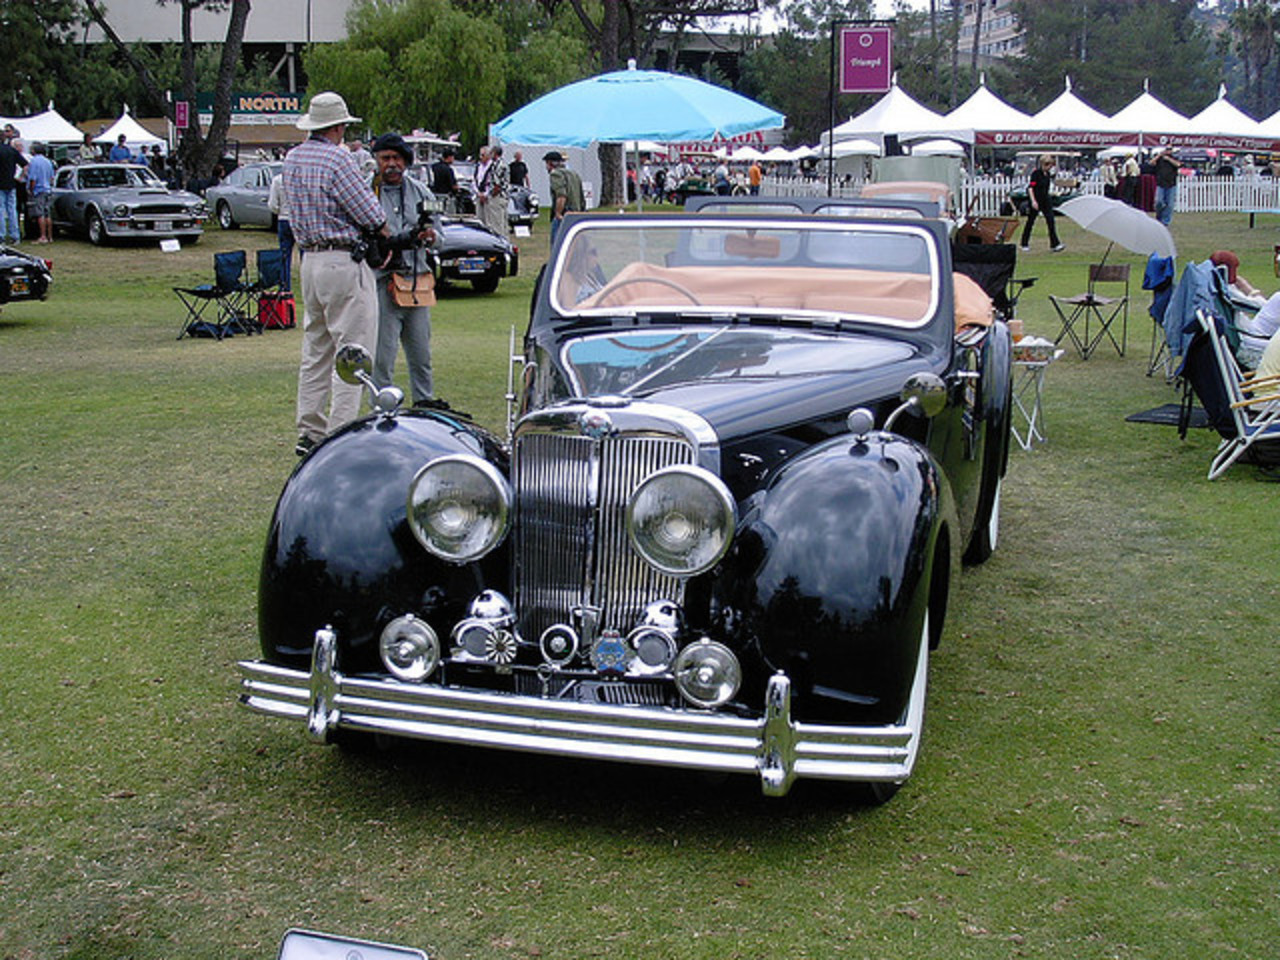 1947 Triumph 1800 Roadster | Flickr - Photo Sharing!